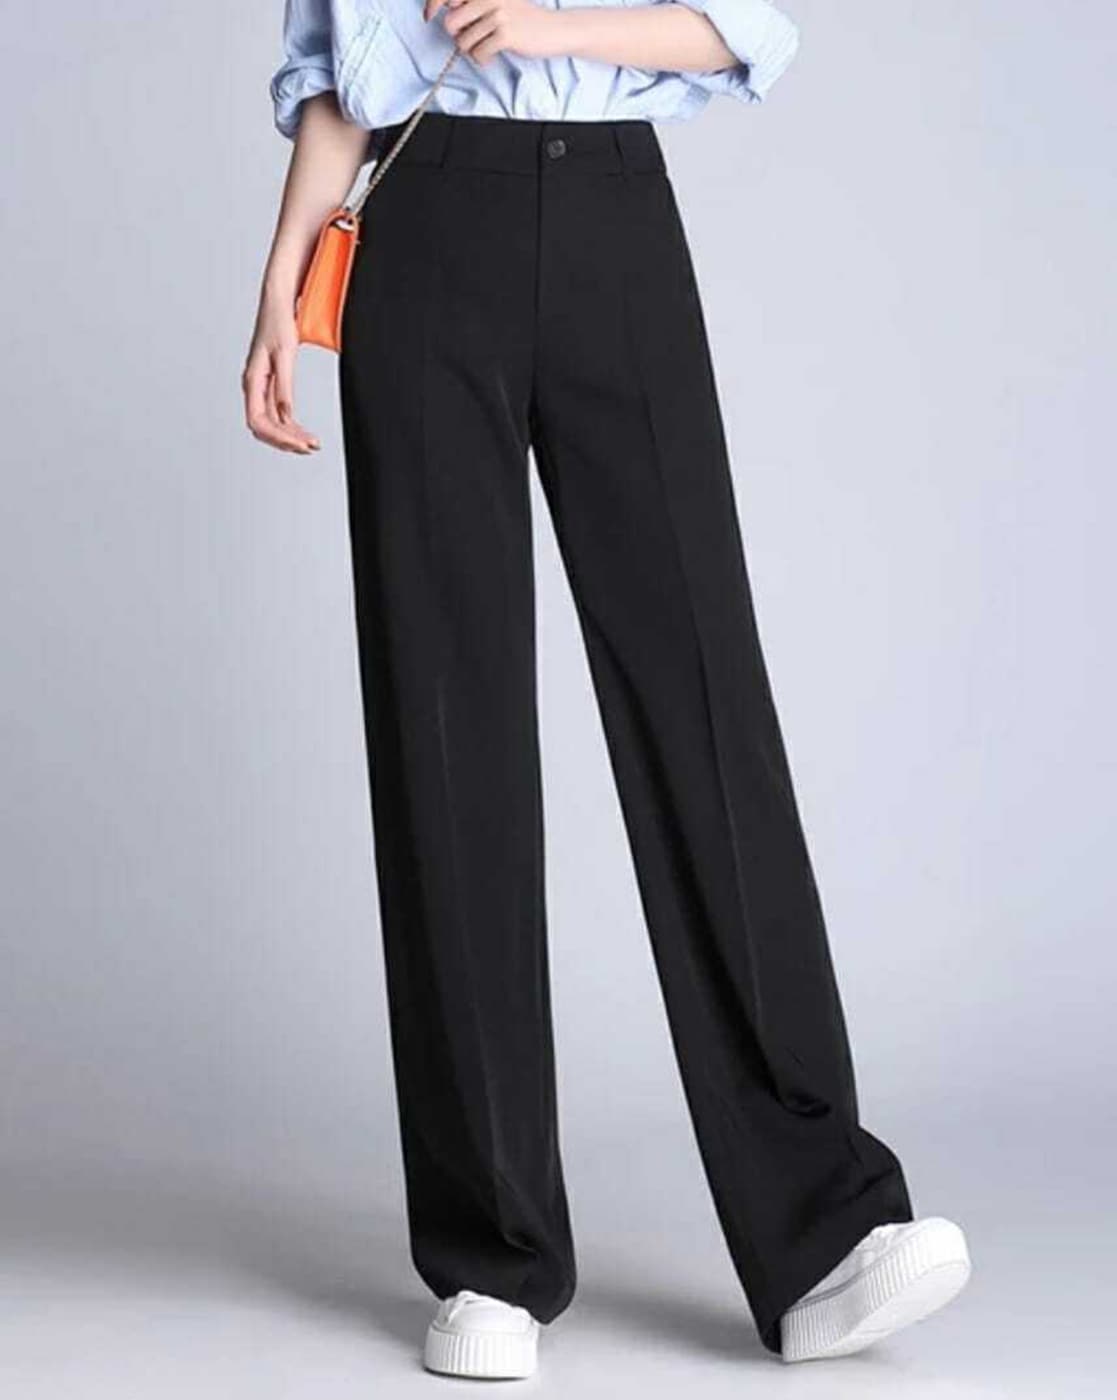 How to Style Wide-Leg Pants for Women Over 50 - Nina Anders